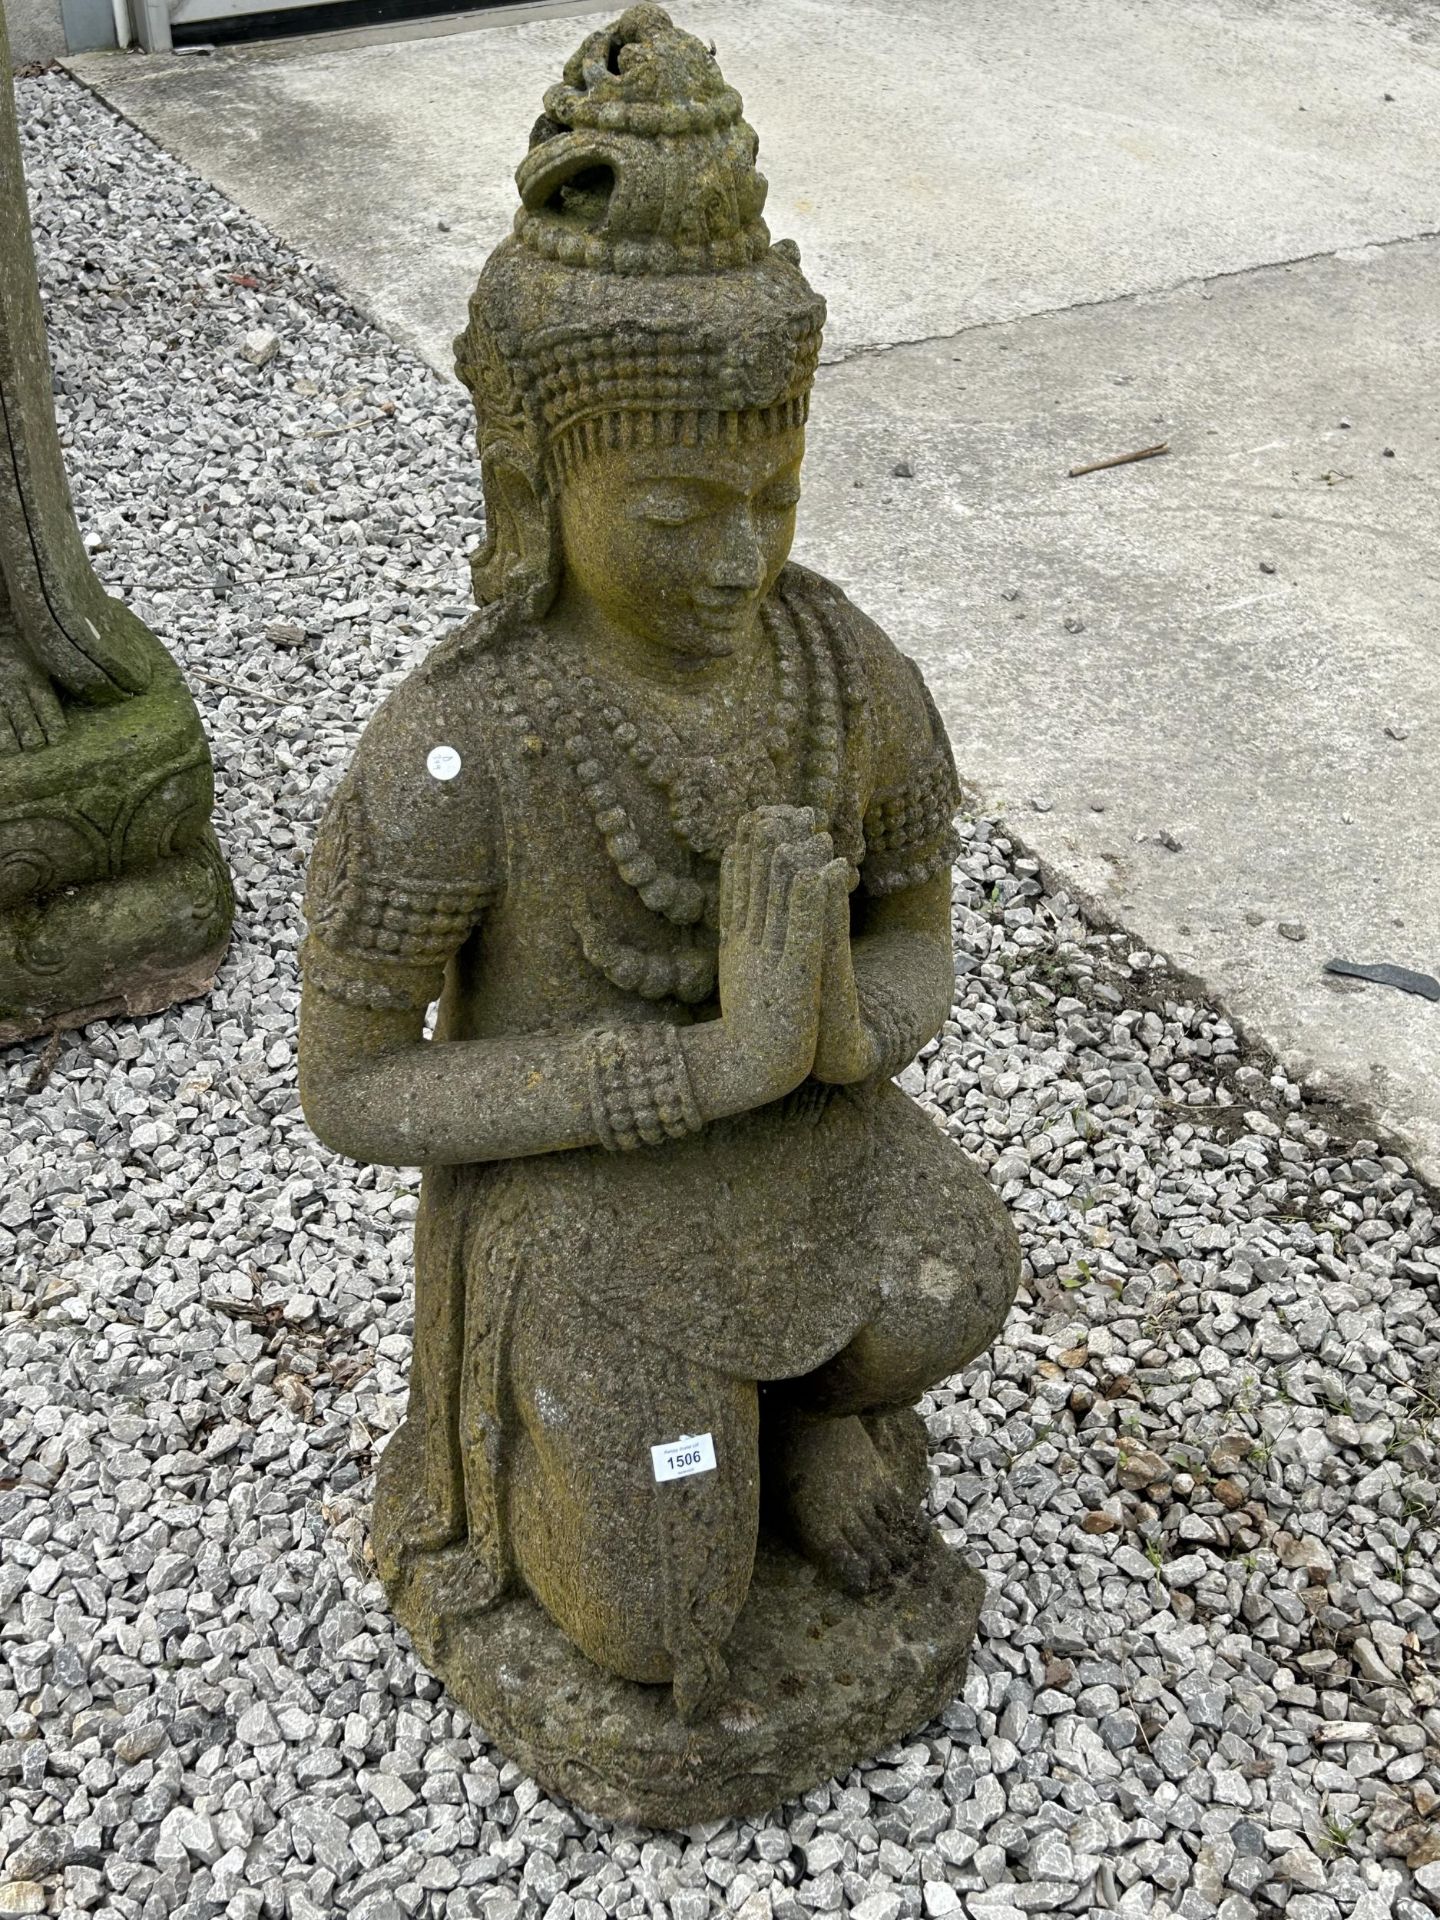 A LARGE RECONSTITUTED STONE BUDDHIST DIETY FIGURE - HEIGHT 108 CM, DEPTH 42 CM